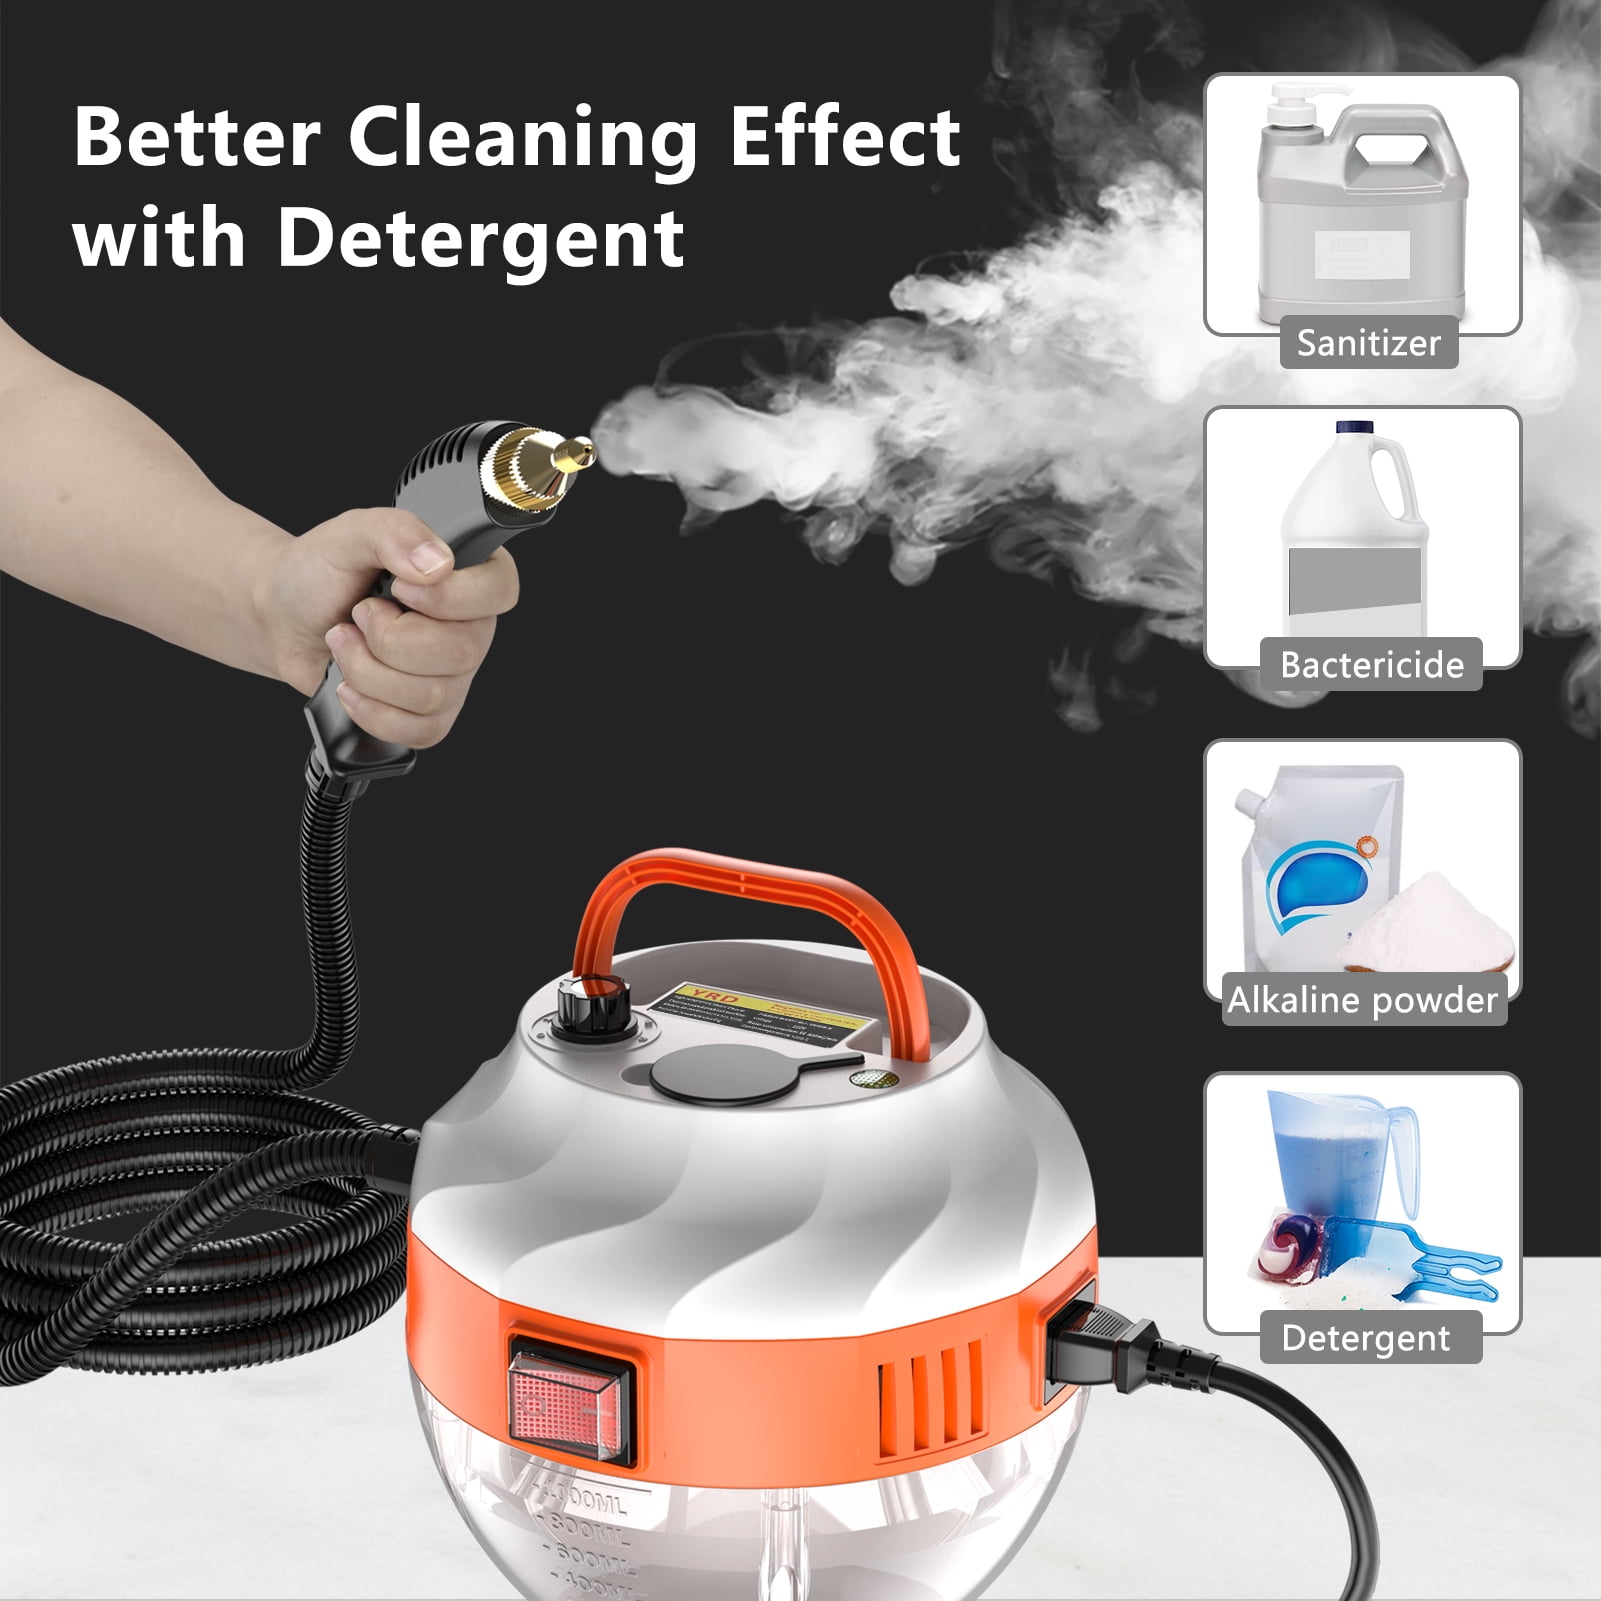  MYWUBAO Steam Cleaner 3000W High Temperature Pressurized Steam  Cleaner Carpet Cleaner Machine Portable Steam Cleaner for Deep Cleaning  Floors, Car, Upholstered Furniture, Bathroom, Windows and More